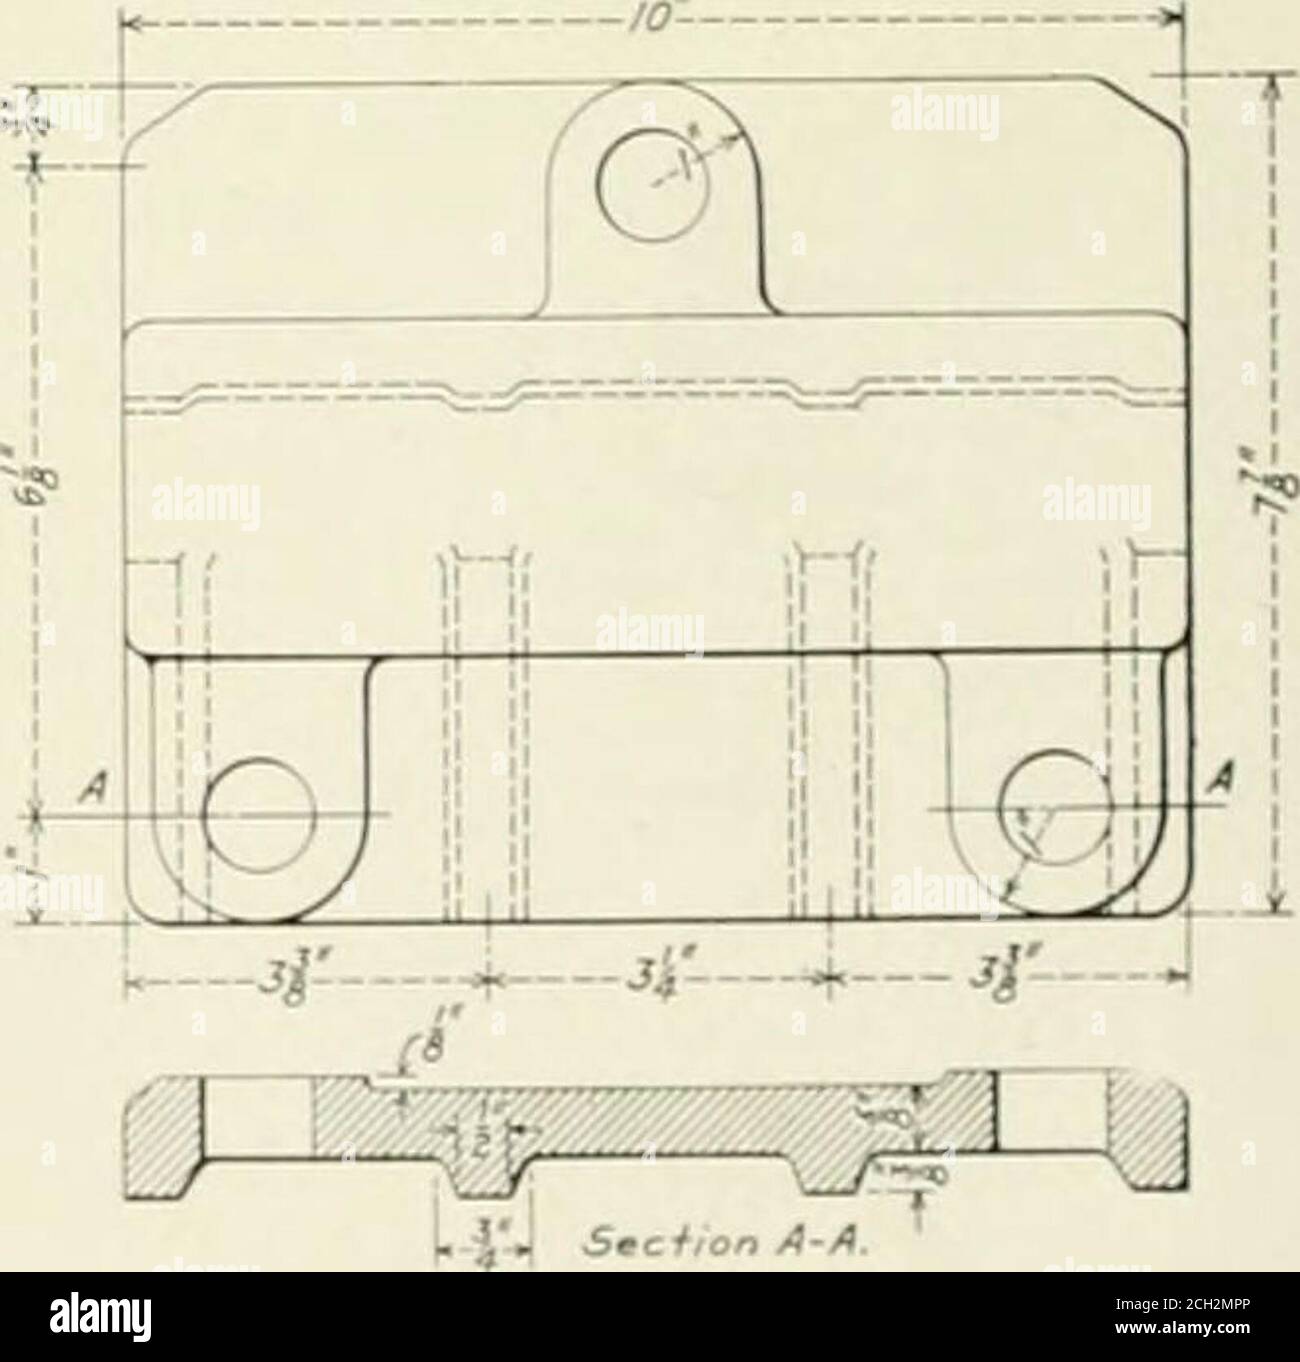 . Railway mechanical engineer . S.c///./«-A Fig. 2. TwoPlece Track Stop for Application at Any Point on the Rail which are bolted to and project above the rail head. It canbe applied to the rails at any point that may be desired, evenat tlie joint between two rails. The use of such stops will prevent many expensive anddangerous accidents, and track stops made to these designsor other similar devices should be used wherever such troublehas been experienced. Fools Rush In Where Angels Fear to Tread The General Manager Gets Some Inside Dope onCauses of the High Cost of Locomotive Repairs BY HUGH Stock Photo